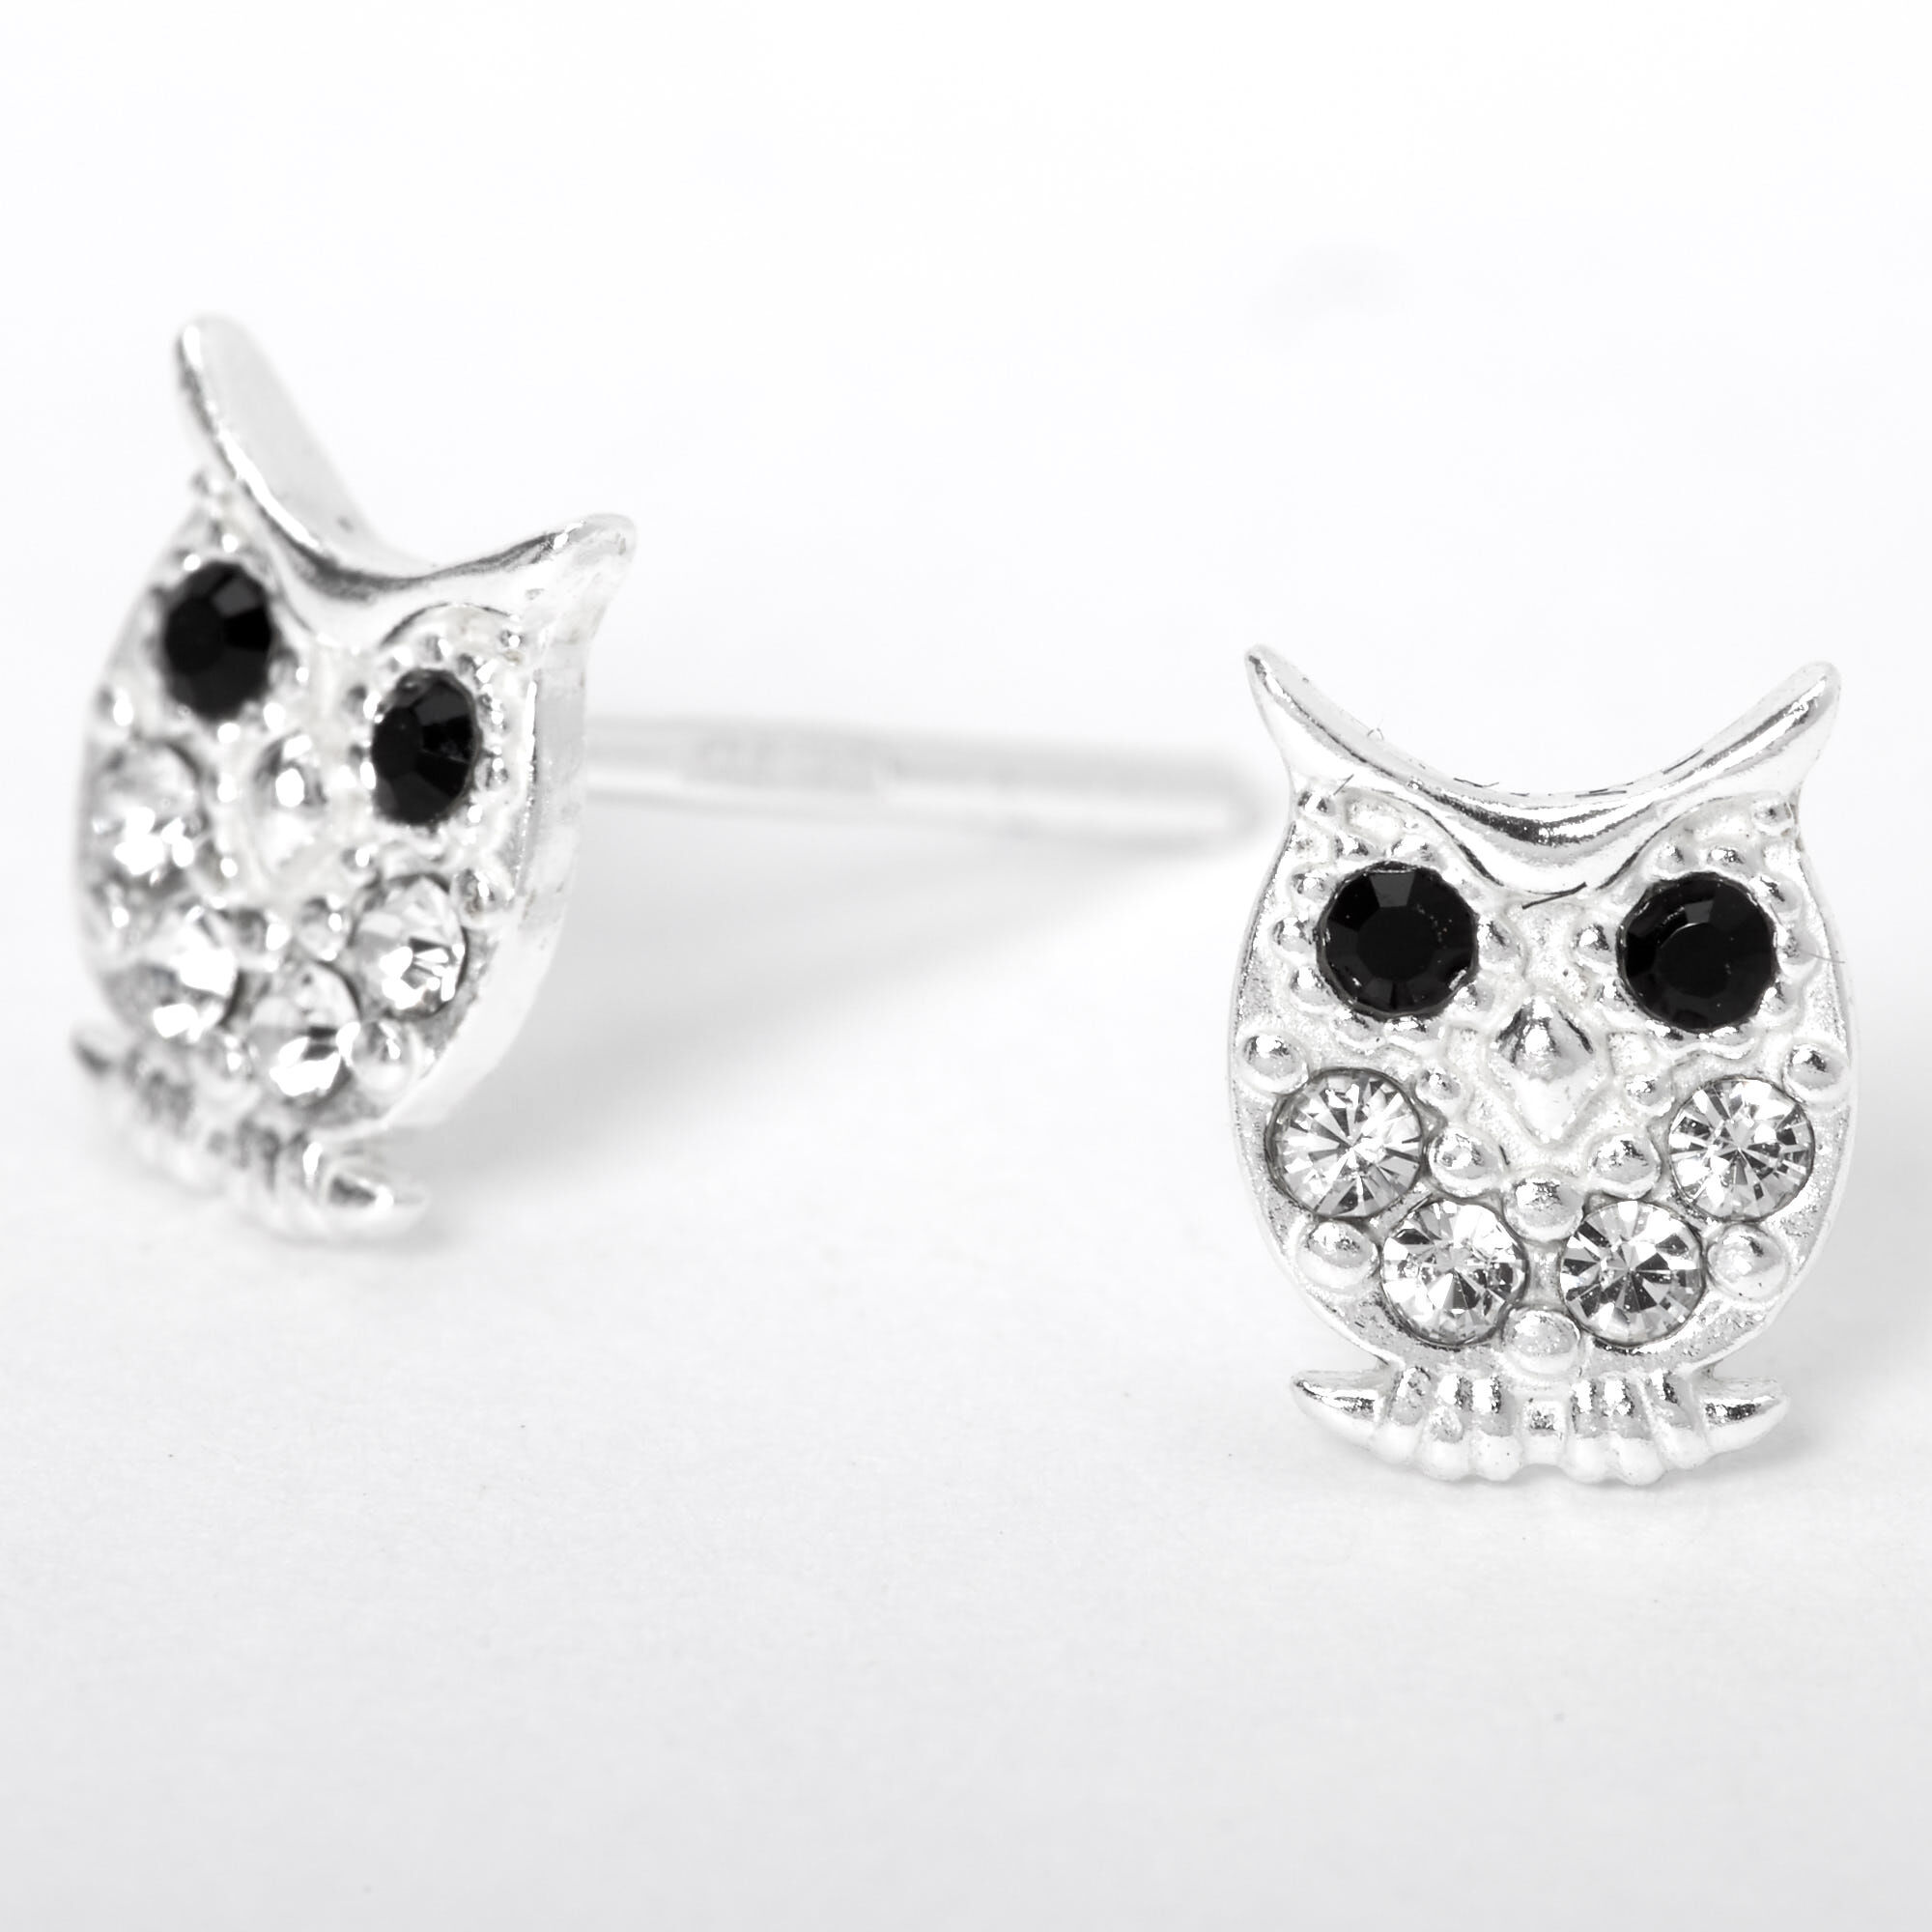 Update more than 91 claire’s owl earrings